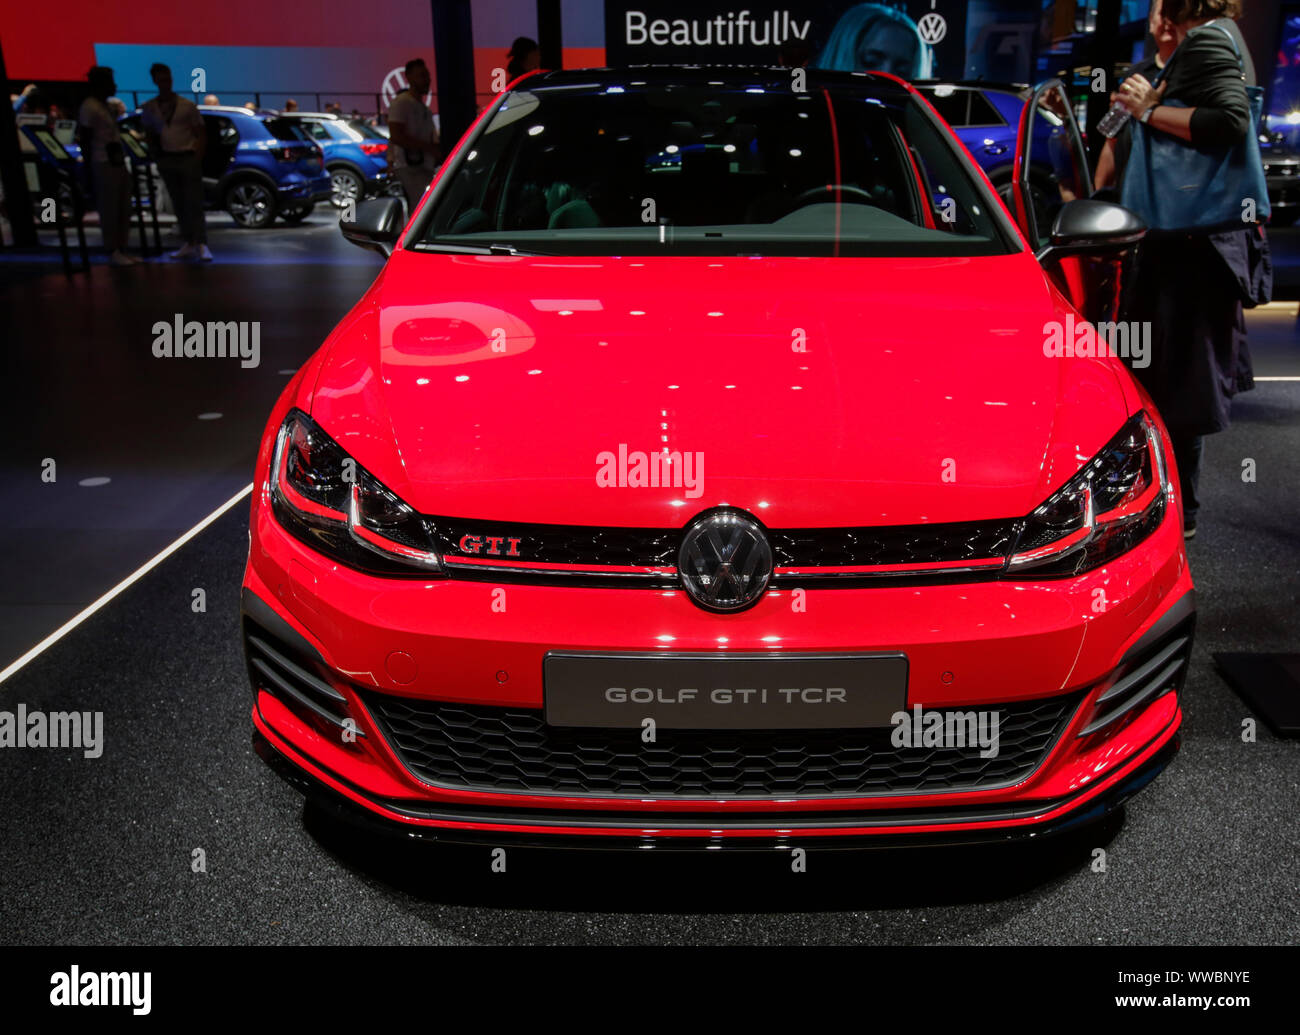 Vw Golf Tcr High Resolution Stock Photography and Images - Alamy